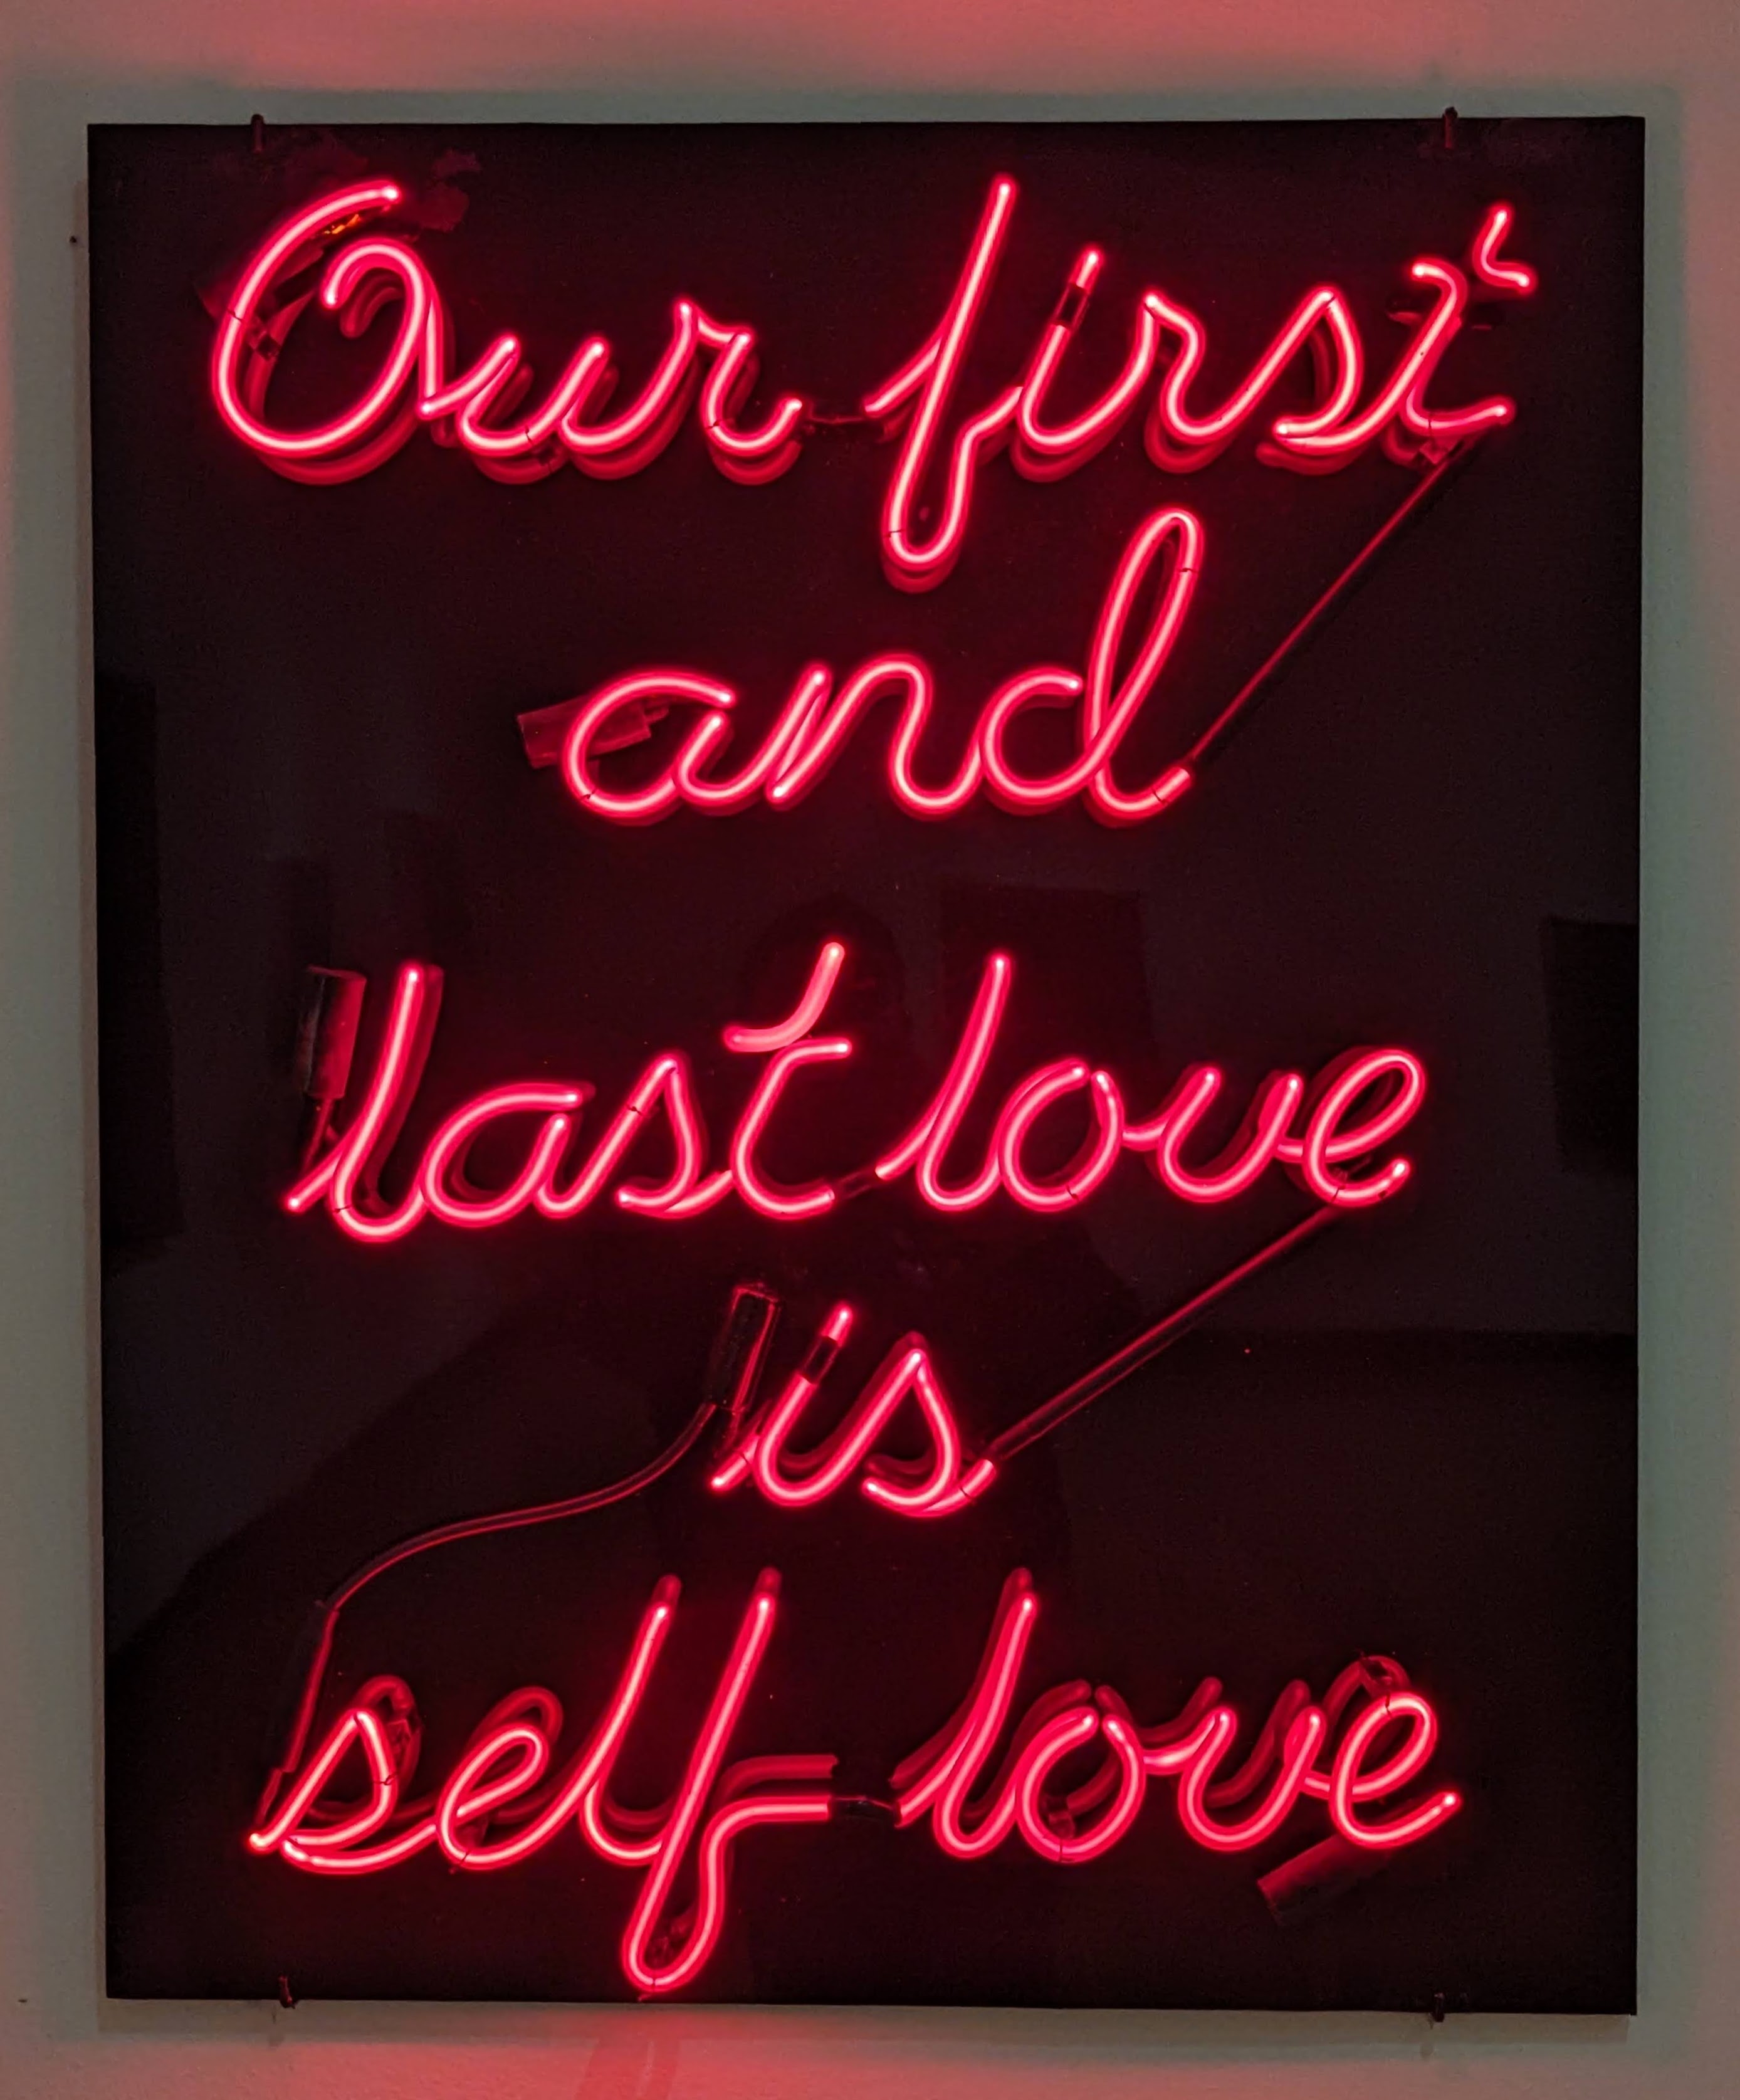 A neon sign by Black queer artist Lyle Ashton Harris reading 'Our first and last love is self love' in lit red text on a black background.